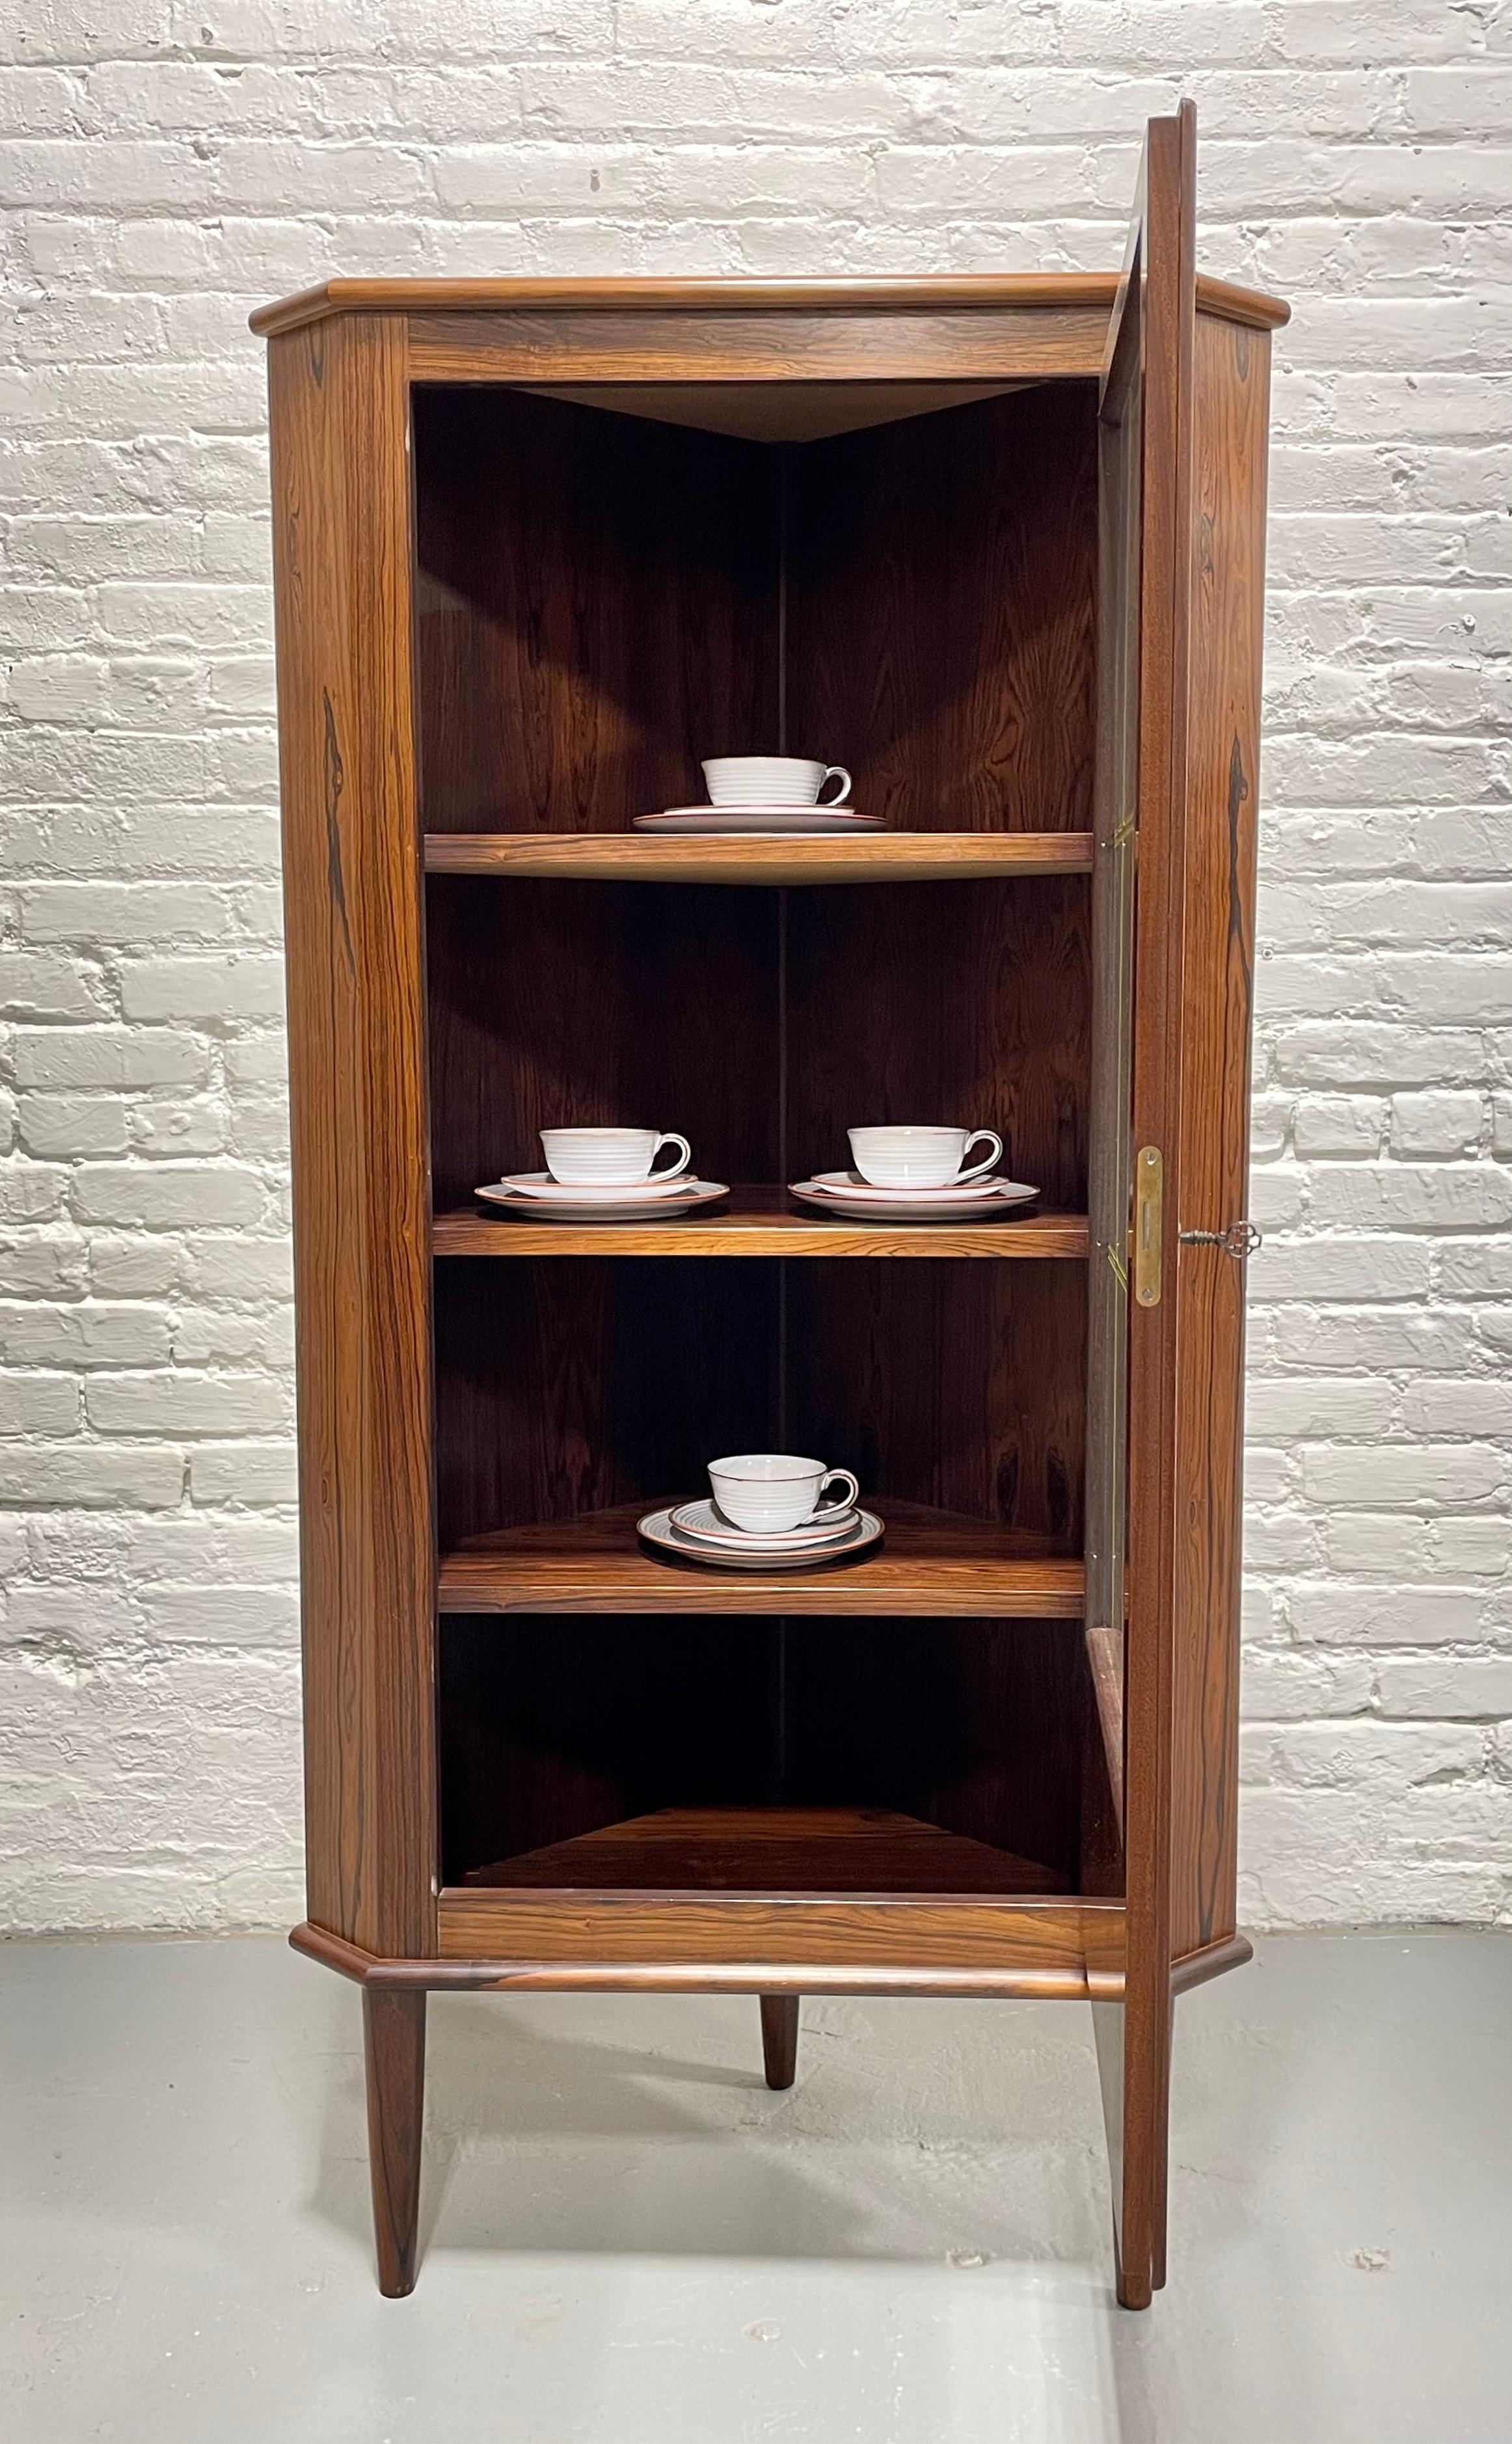 ROSEWOOD Mid Century Modern CORNER Bookcase / China or Liquor Cabinet, c. 1960s For Sale 2